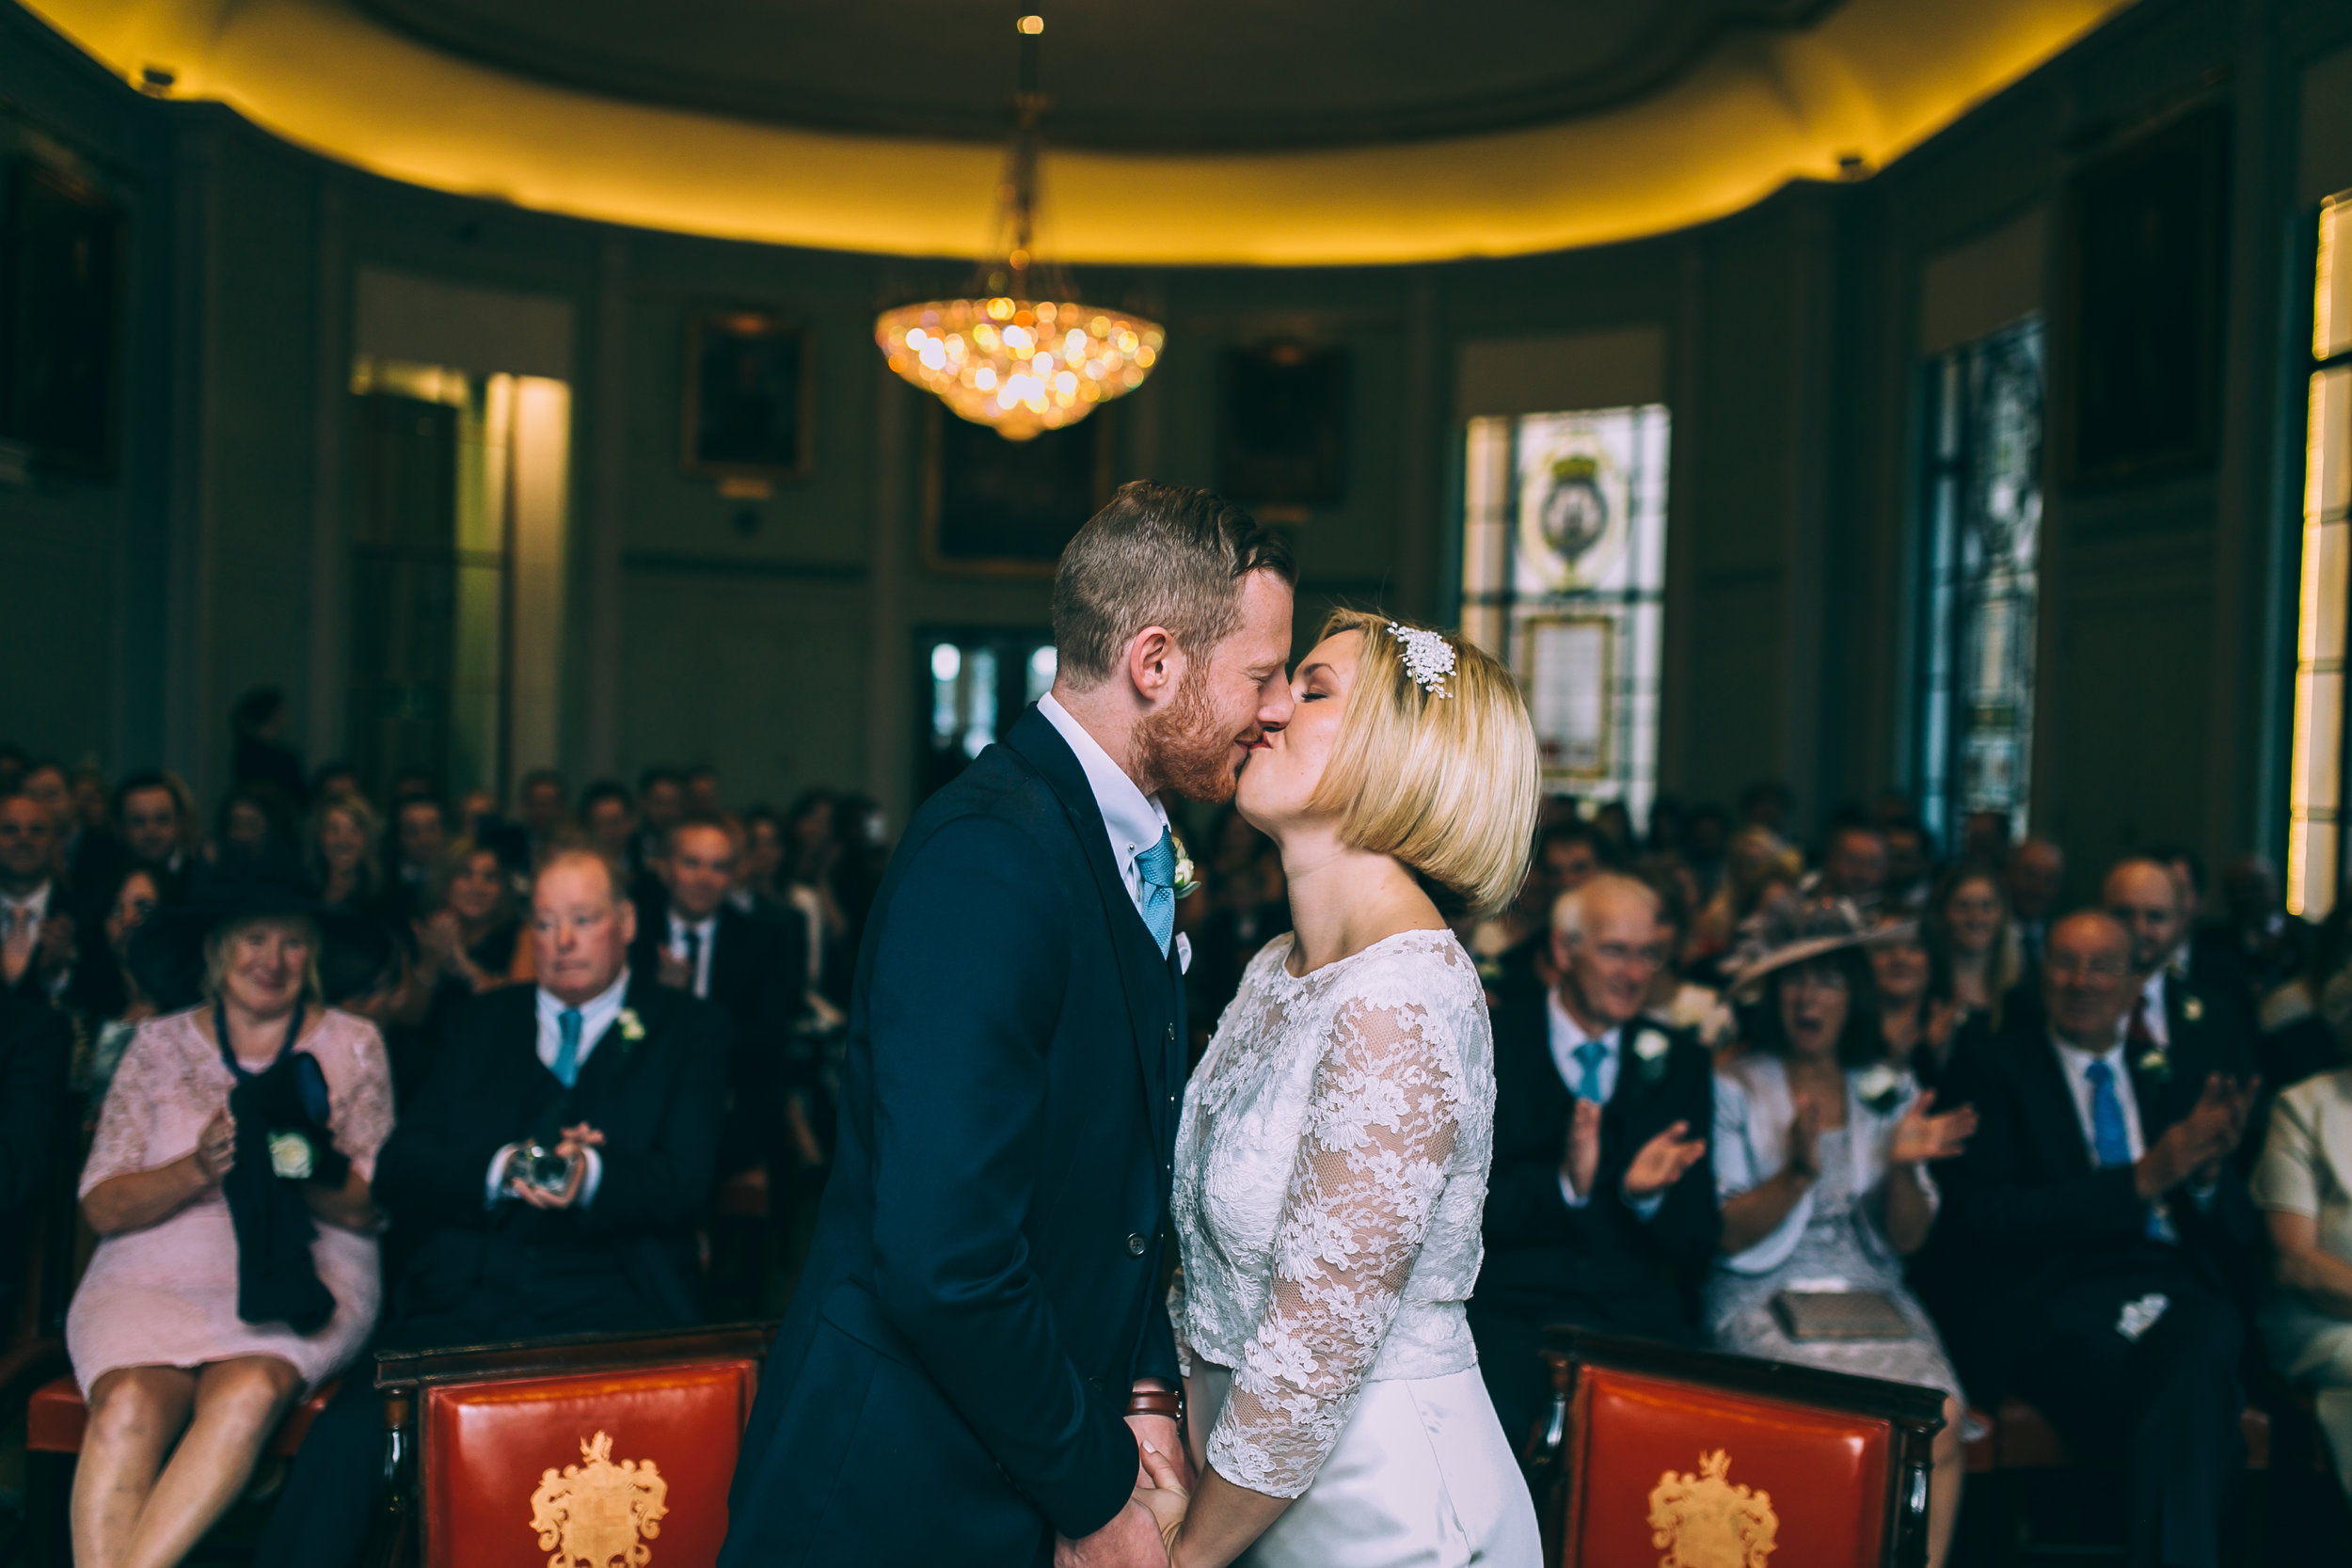 Alex and Ian-Wedding-at-Trinity House-Oyster Shed London-tom-biddle-photography - tb0010.jpg